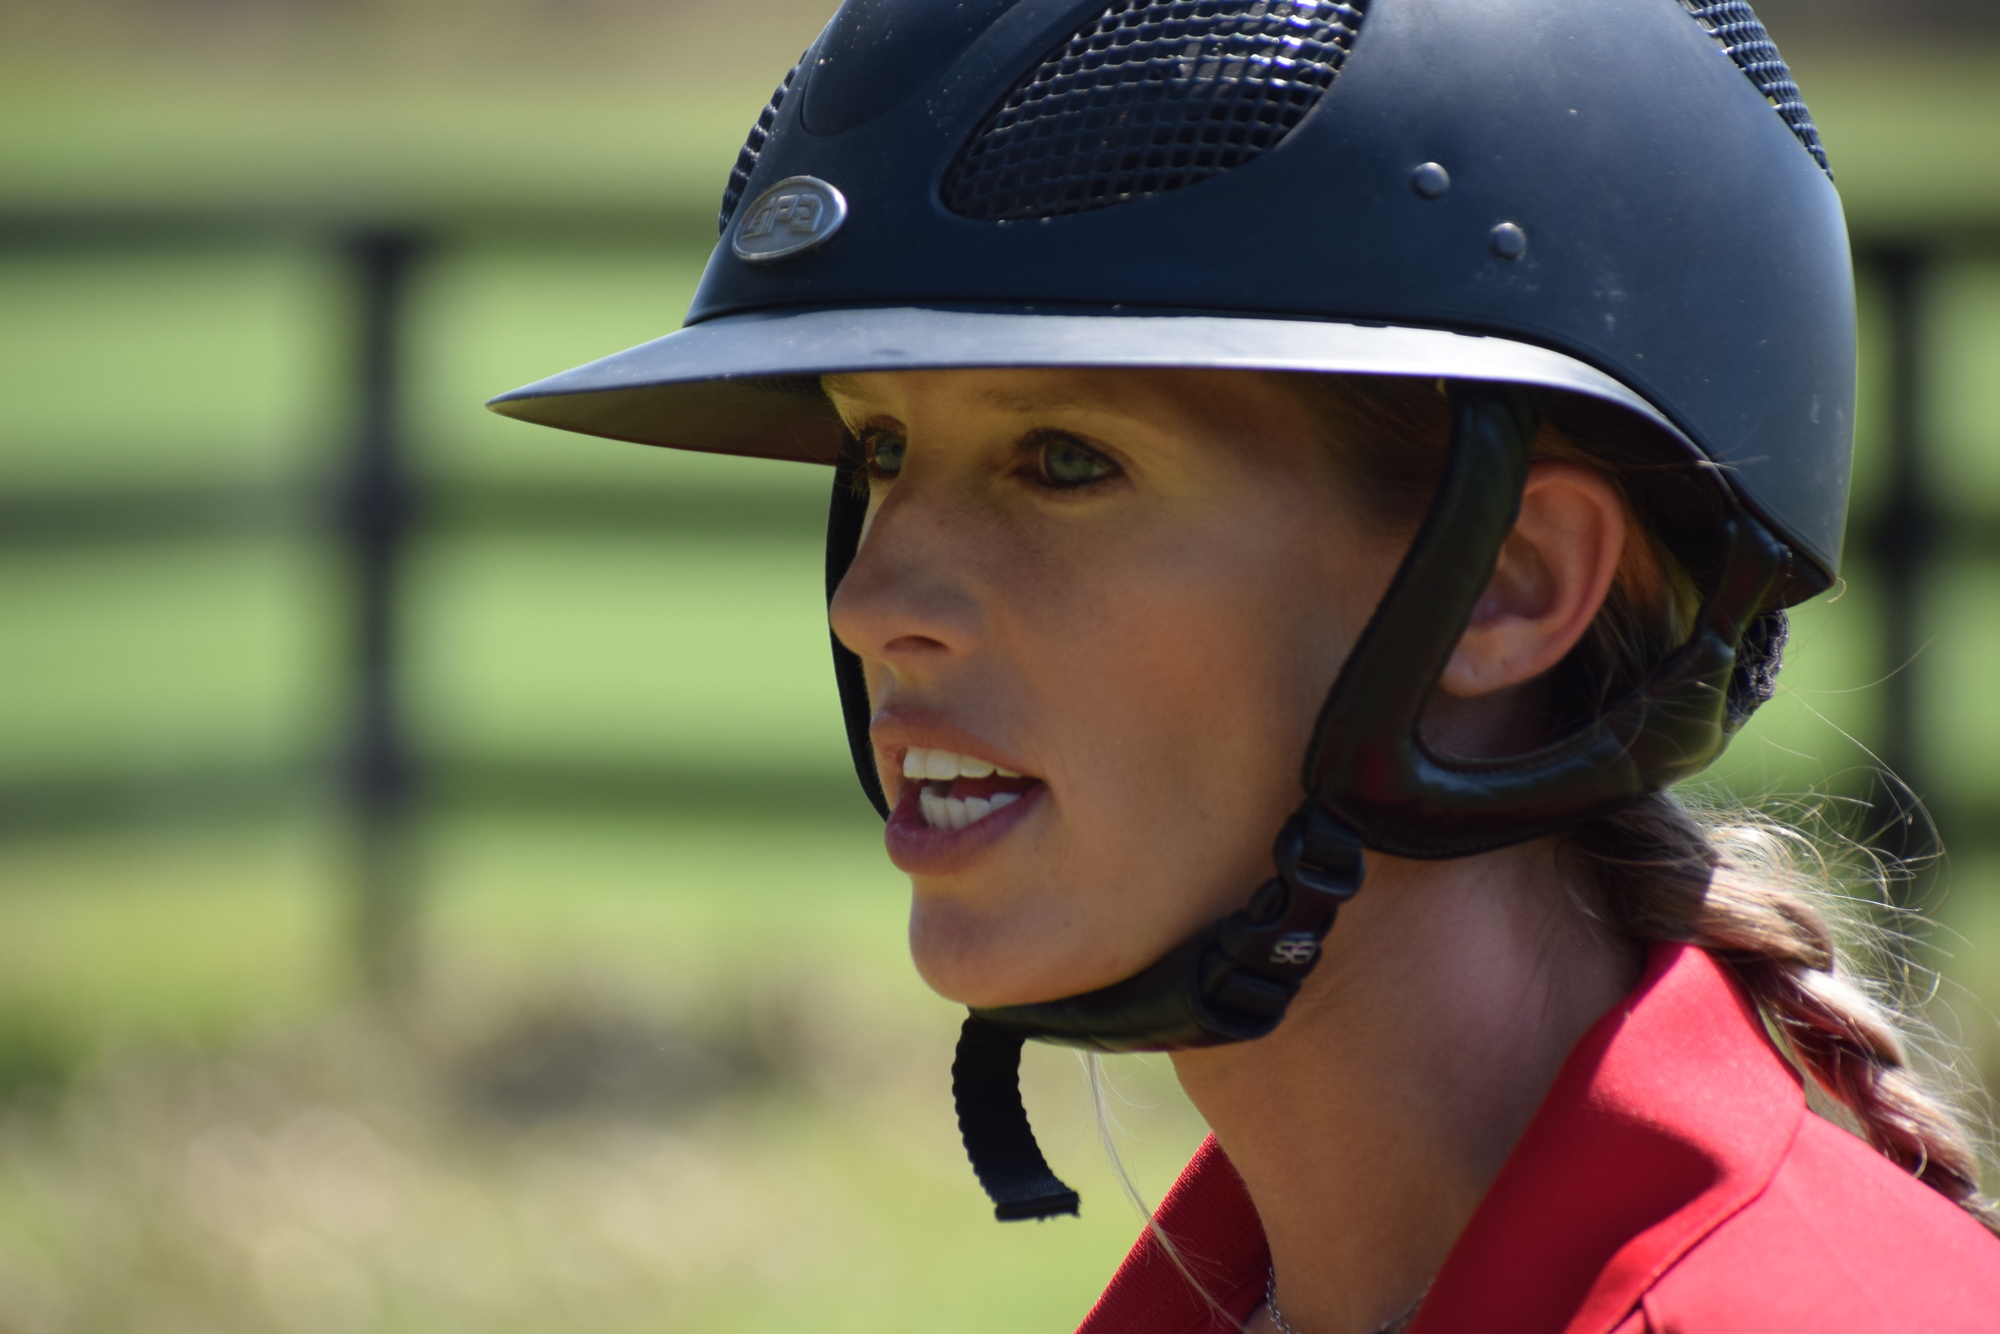 Polo instructor Ashlie Osburg says she has students from age 6 to those in their 70s.